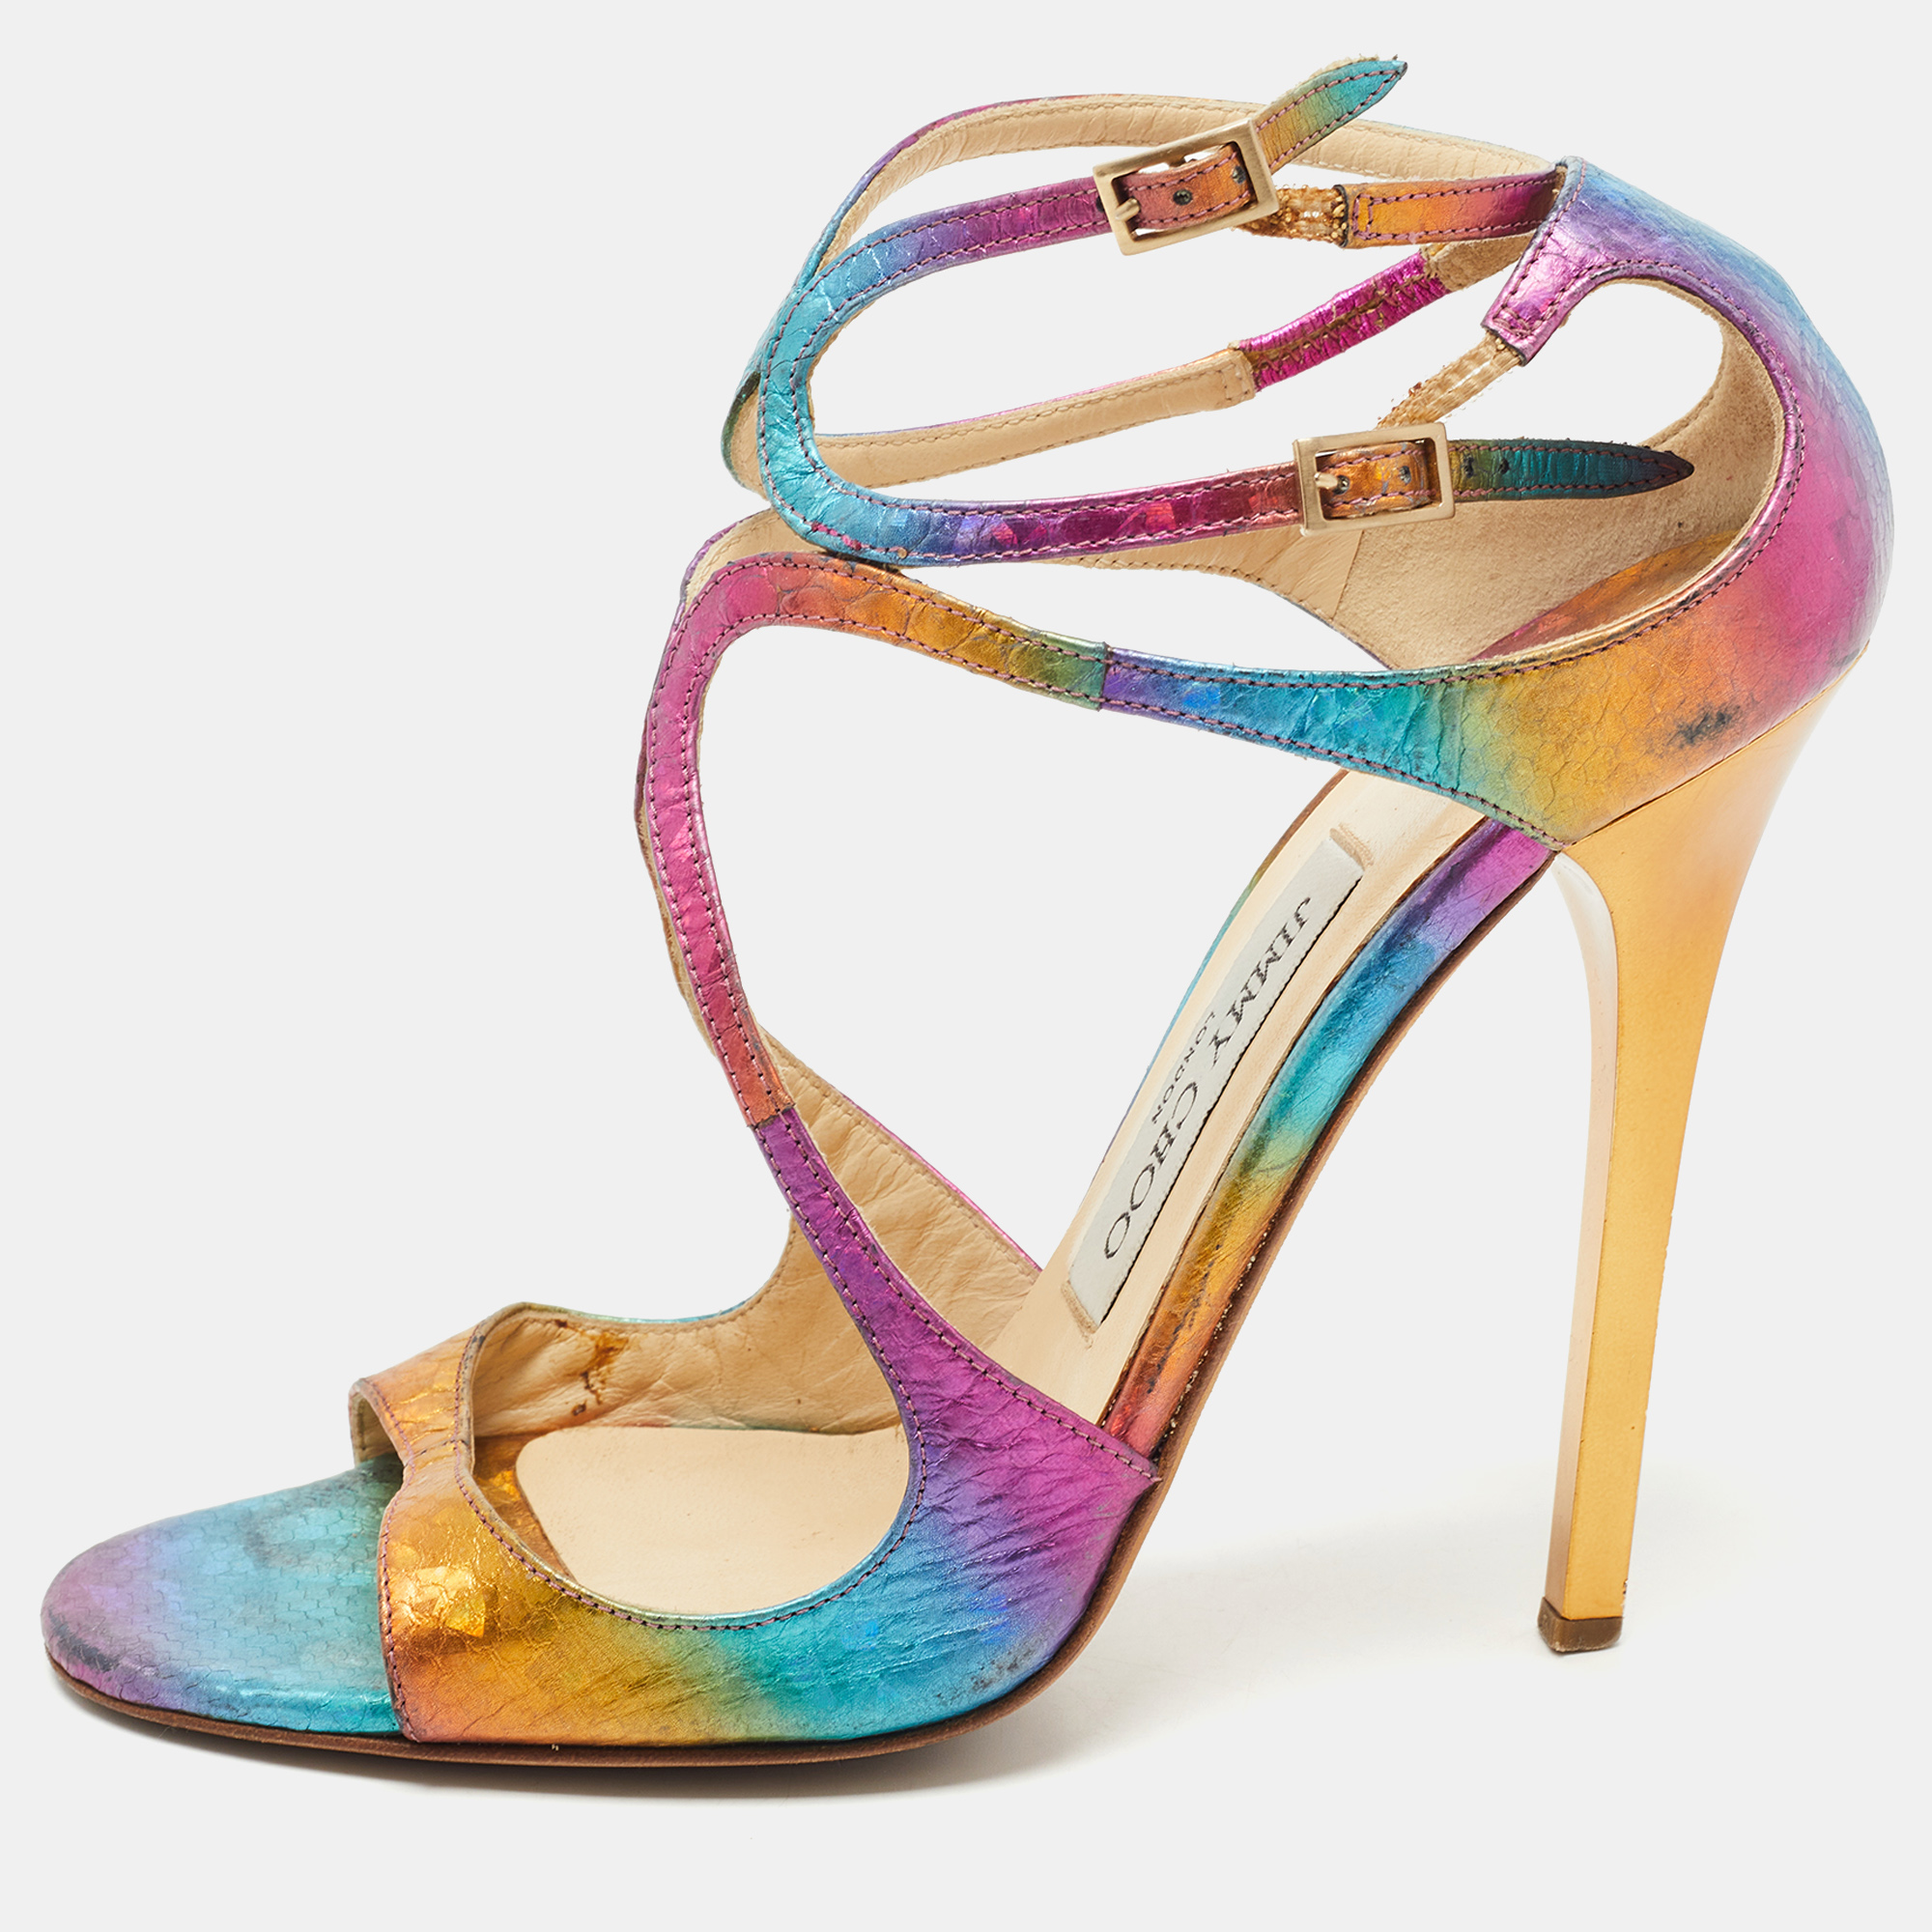 Jimmy choo multicolor python embossed leather lance sandals size 37